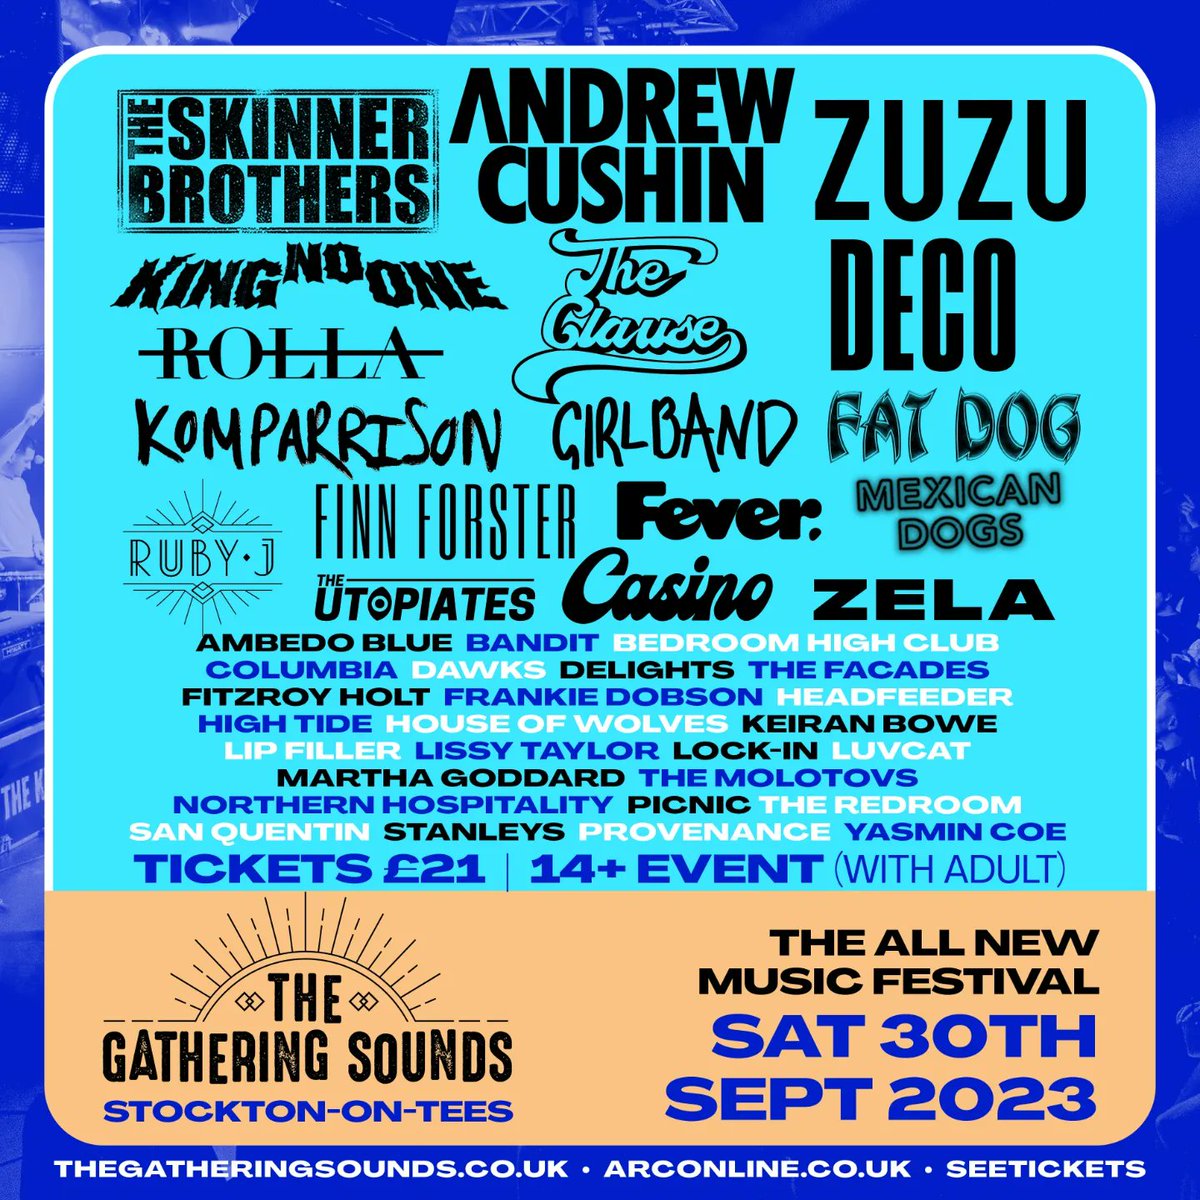 Full lineup for @thegatheringsounds 
Come see us people 👅

Sat 30th September, tickets onsale now! 

#gatheringsounds #stocktonontees #musicfestival